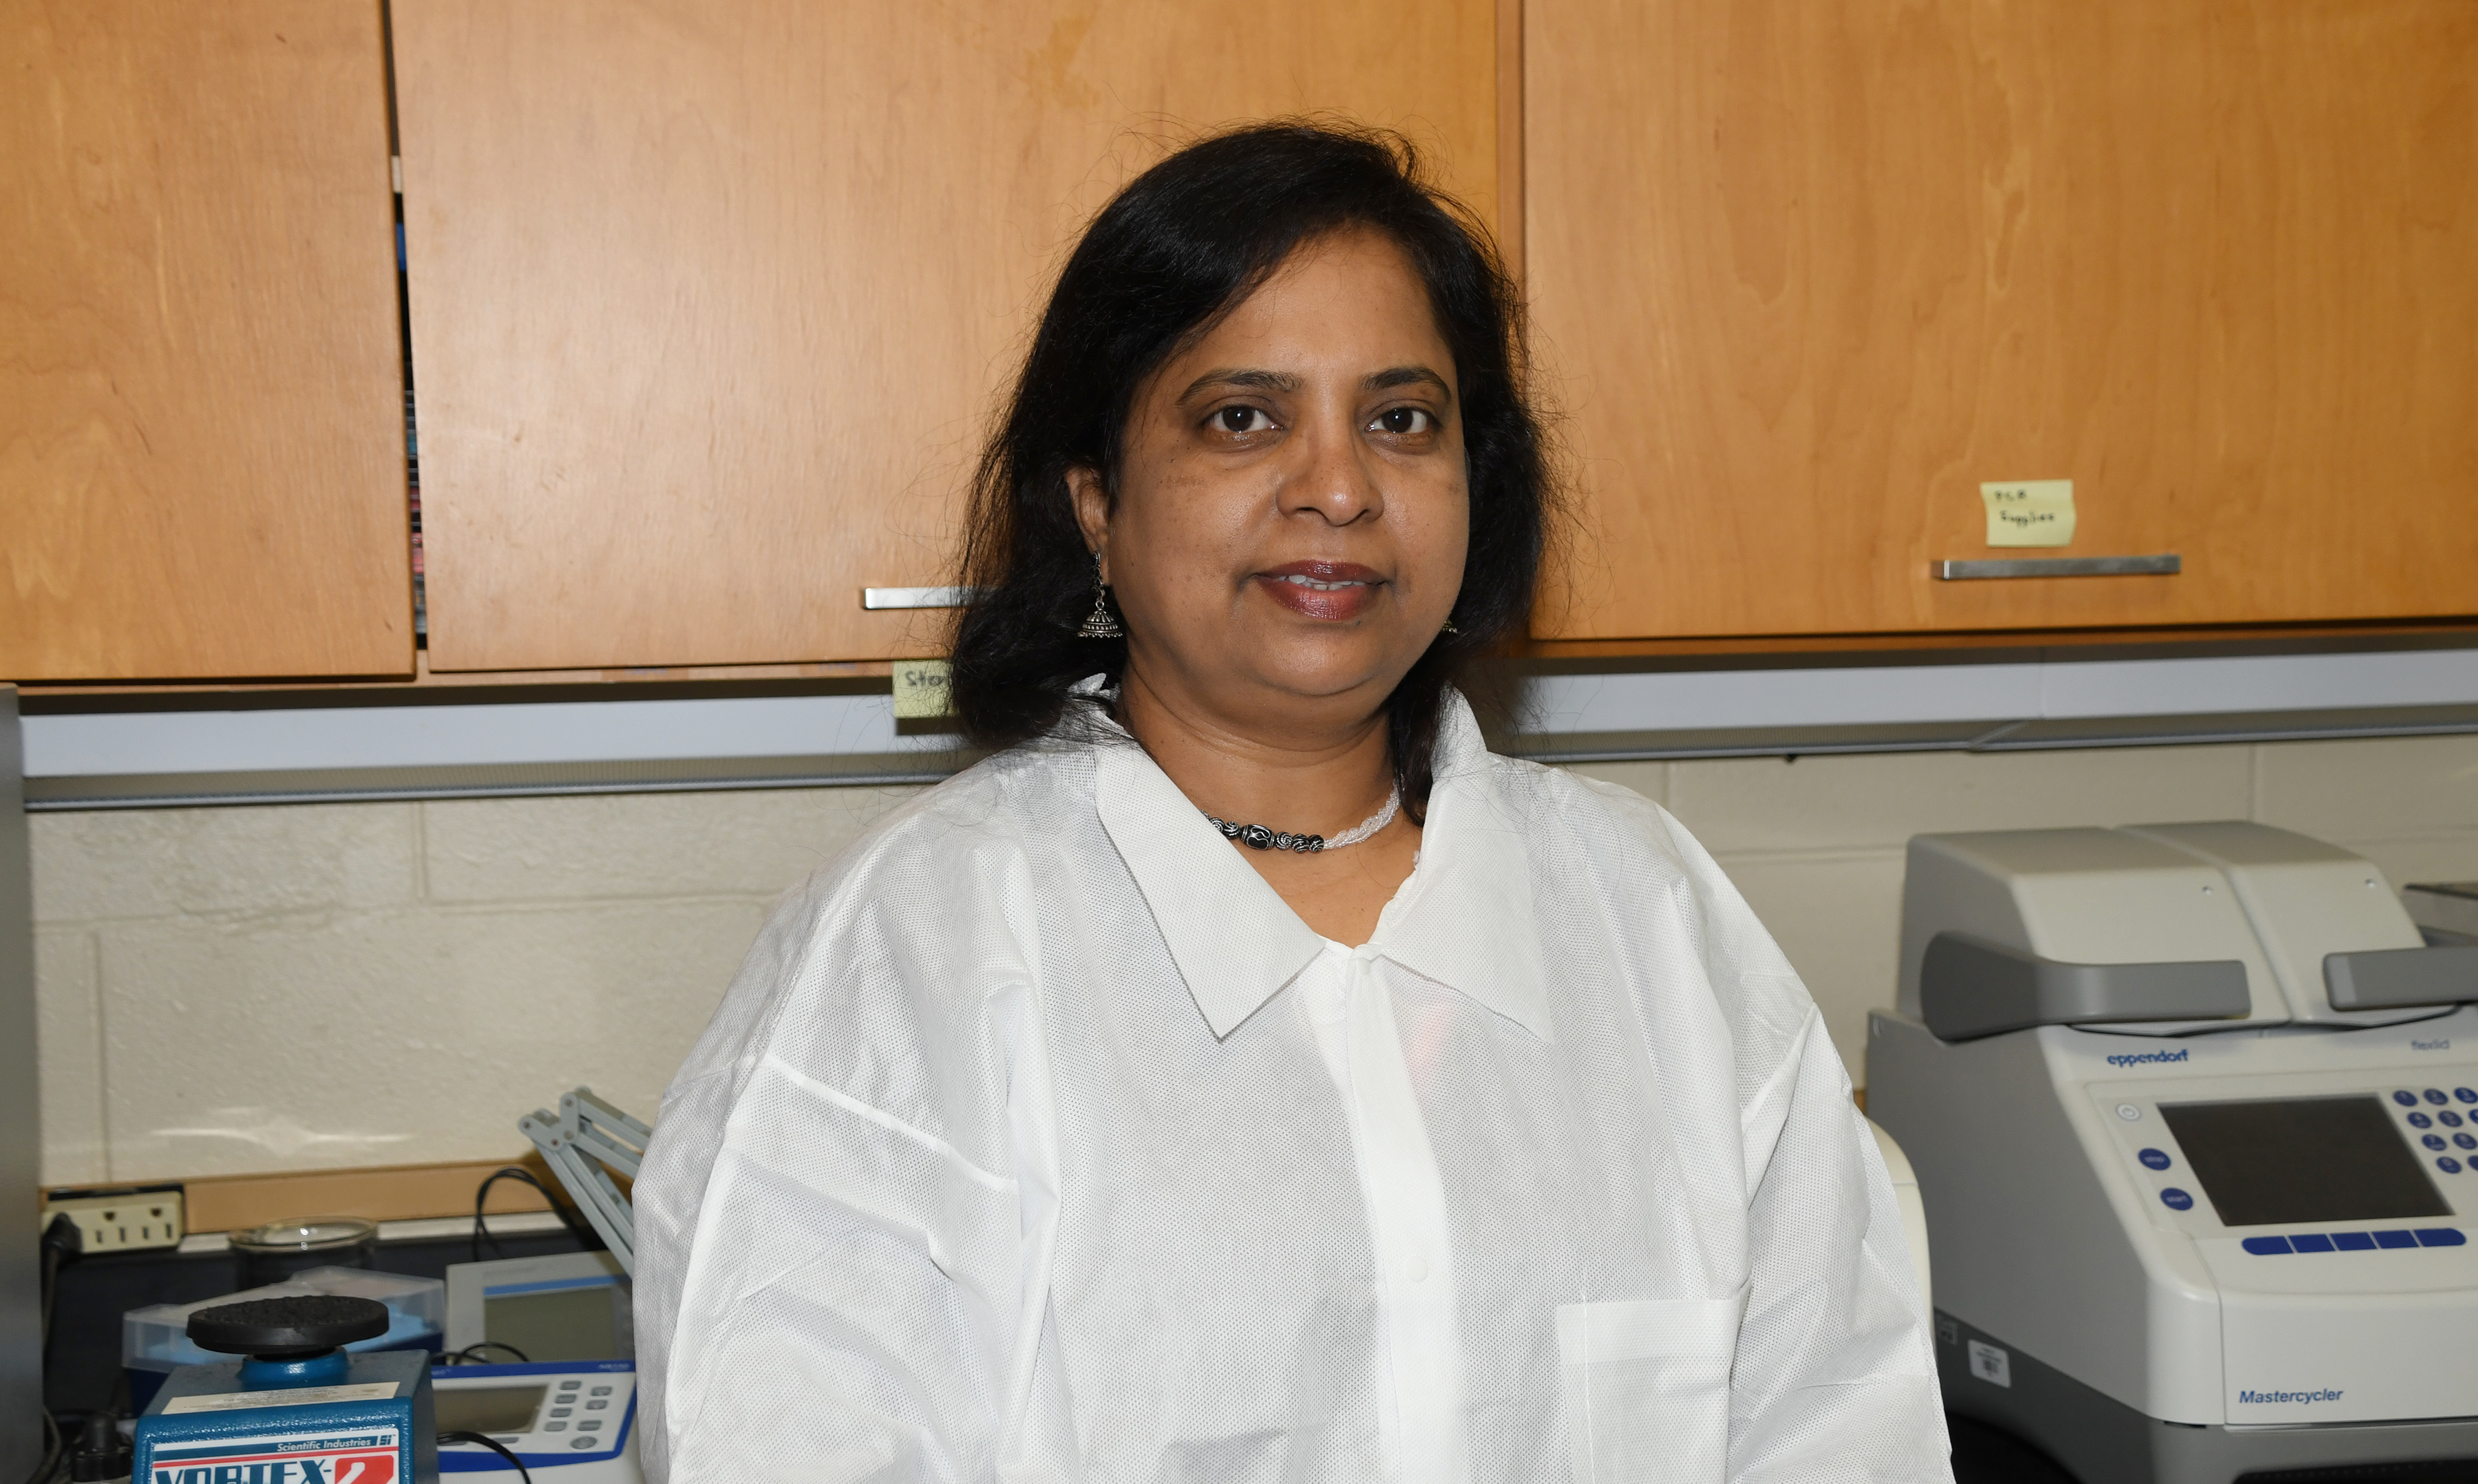 As a Fulbright specialist, Dr. Kalpalatha Melmaiee will travel to her native India to share her knowledge at Tamil Nadu Agriculture University to help that region address the impact of drought on plant crops.